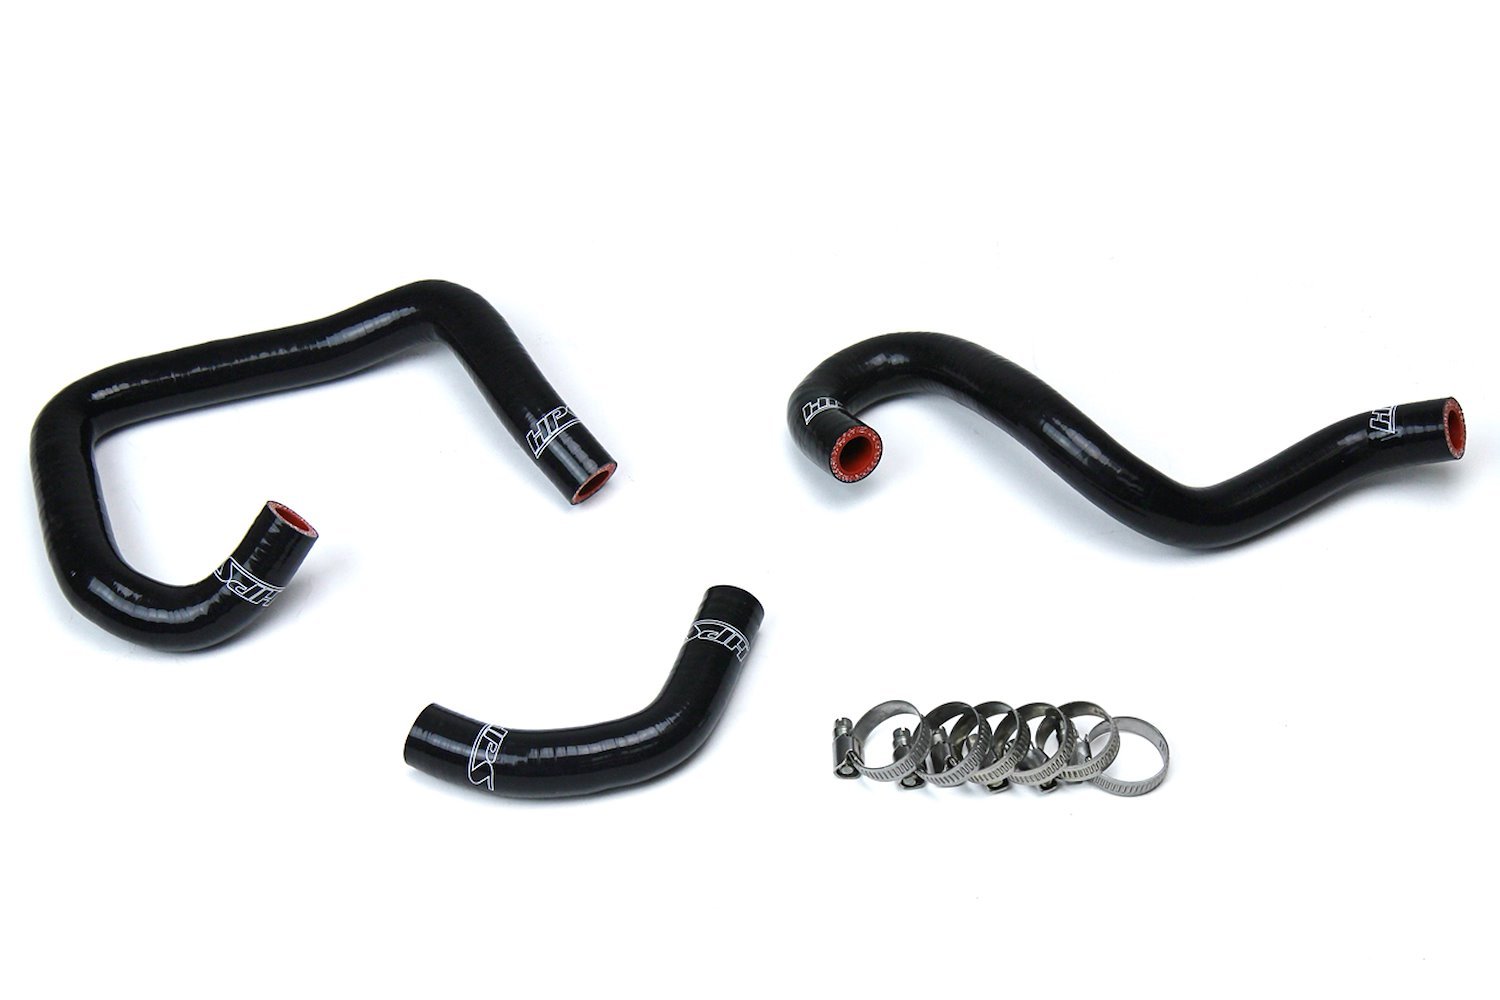 57-1521-BLK Heater Hose Kit, High-Temp 3-Ply Reinforced Silicone, Replace OEM Rubber Heater Coolant Hoses